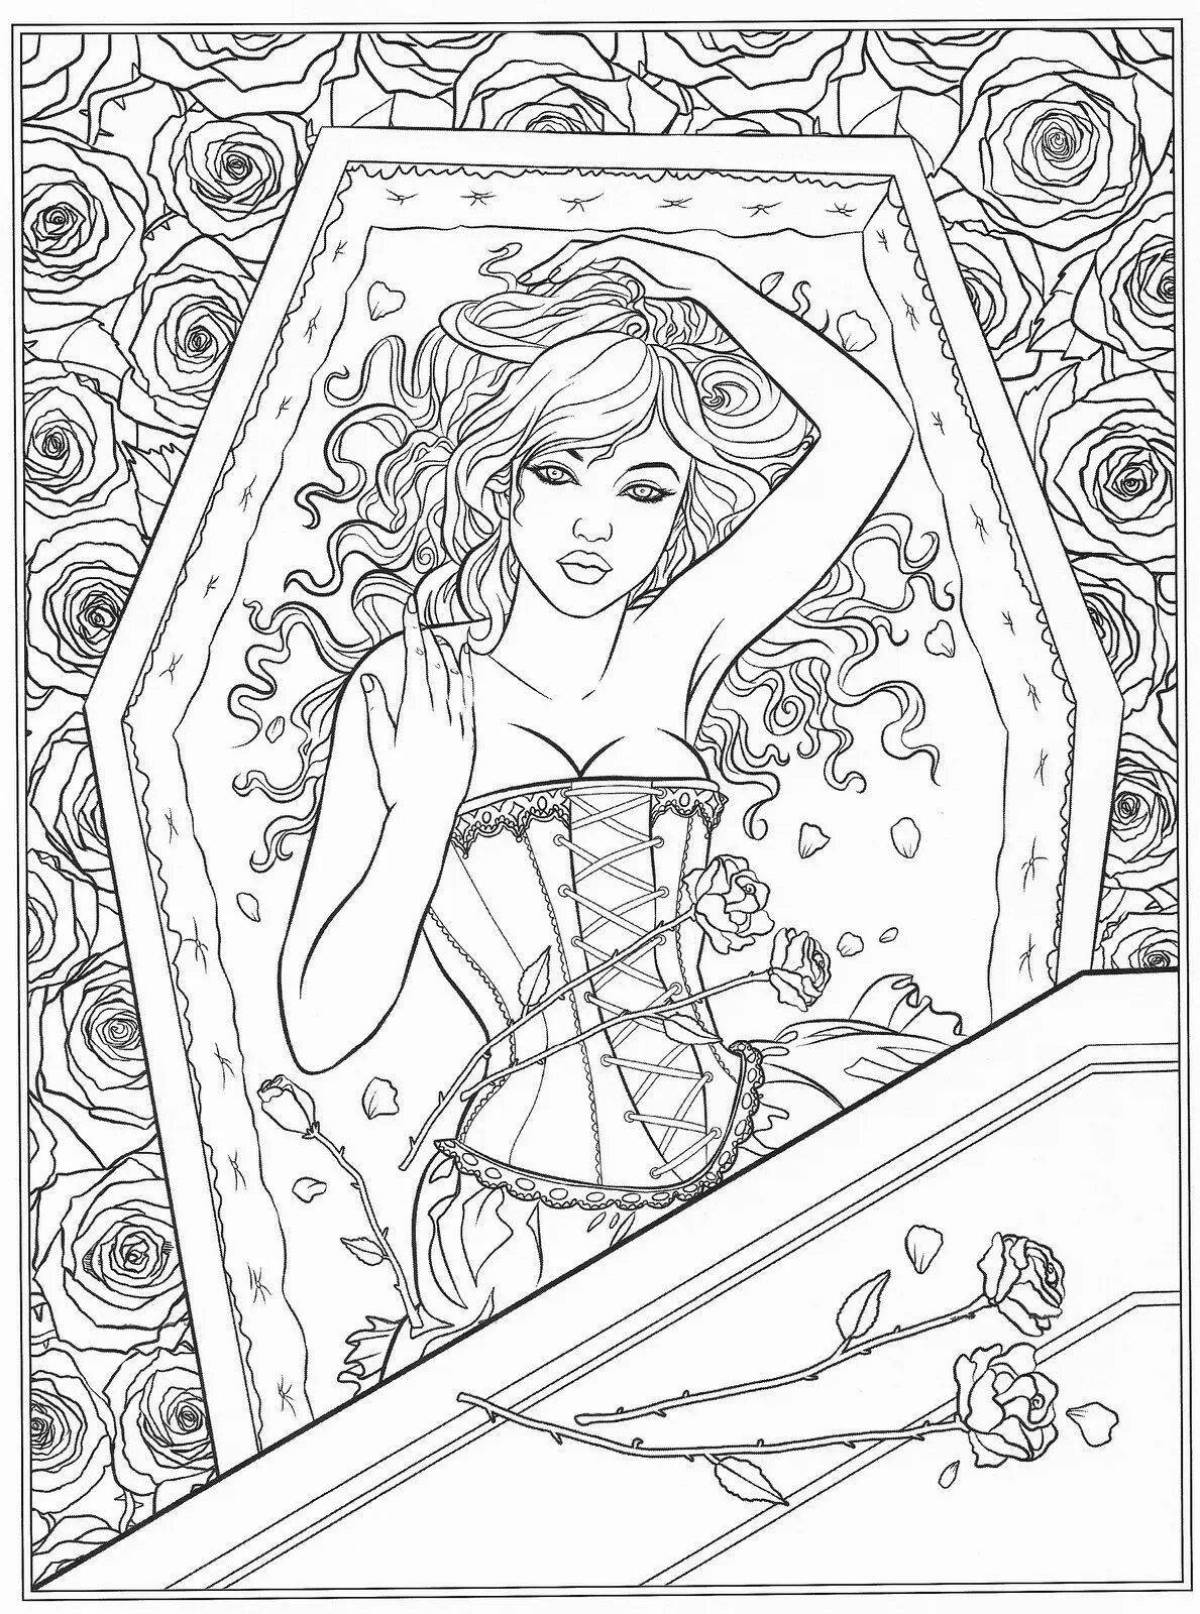 Amazing coloring book for all adults 18